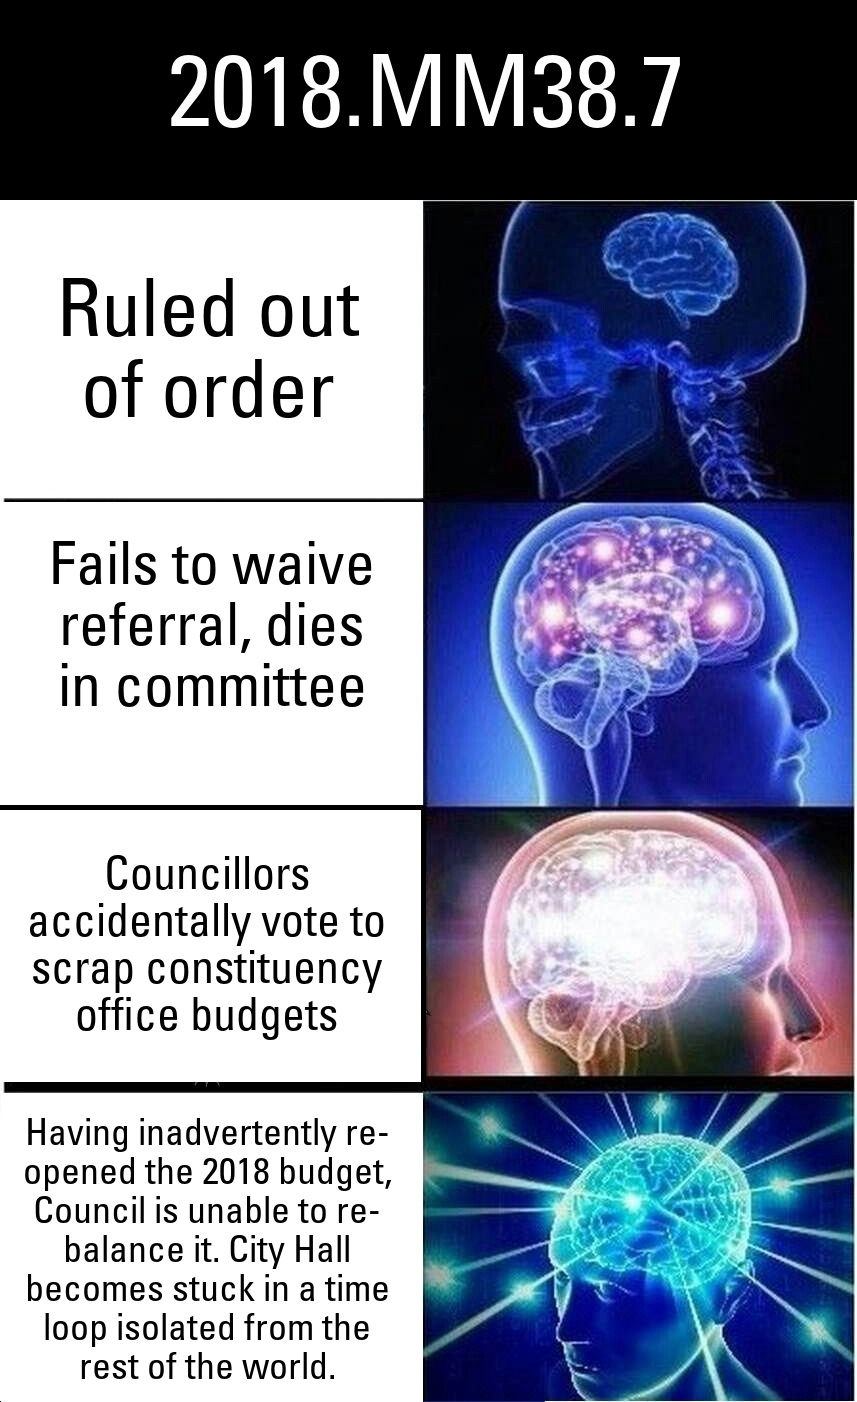 Small brain: ruled out of order.  Big brain: Fails to waive referral, dies in committee. Cosmic brain: councillors accidentally vote to eliminate constituency office budgets. Galactic brain: having inadvertently re-opened the 2018 budget, Council is unable to re-balance it. City Hall is frozen in a time loop, isolated from the outside world.